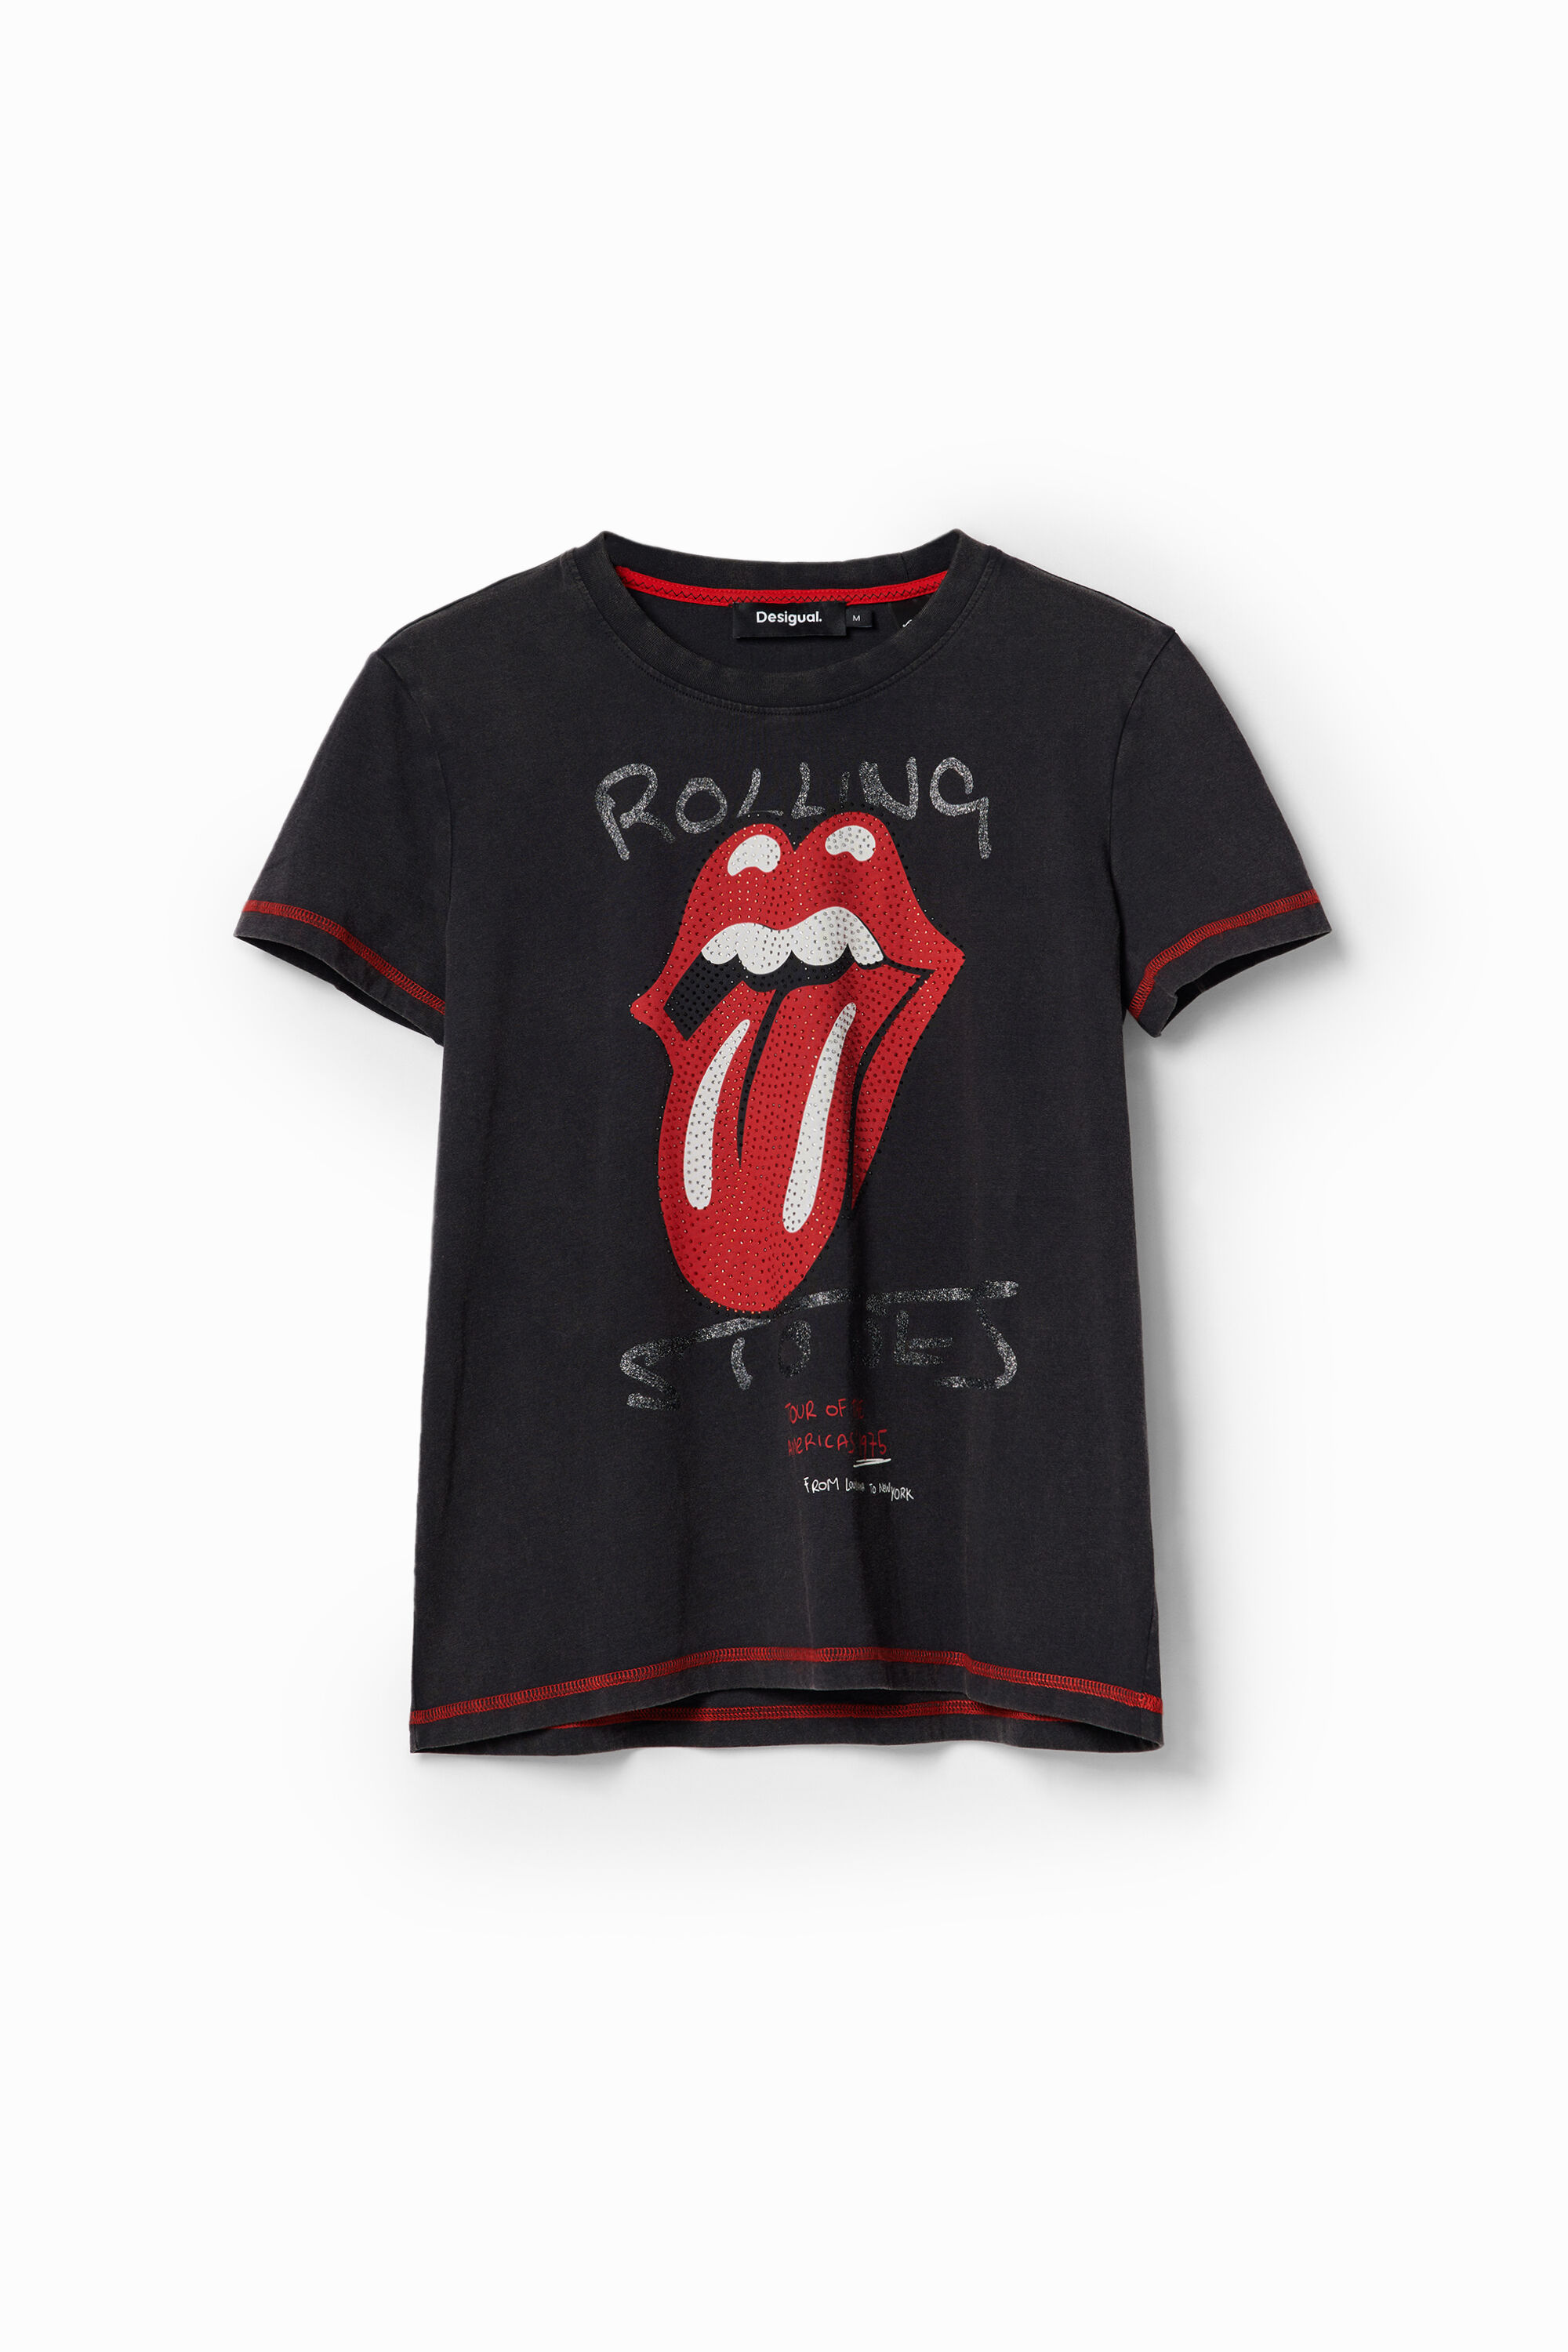 DEsigual ROLLING STONES black T-shirt with rhinestone lips Fall Winter 2023 collection